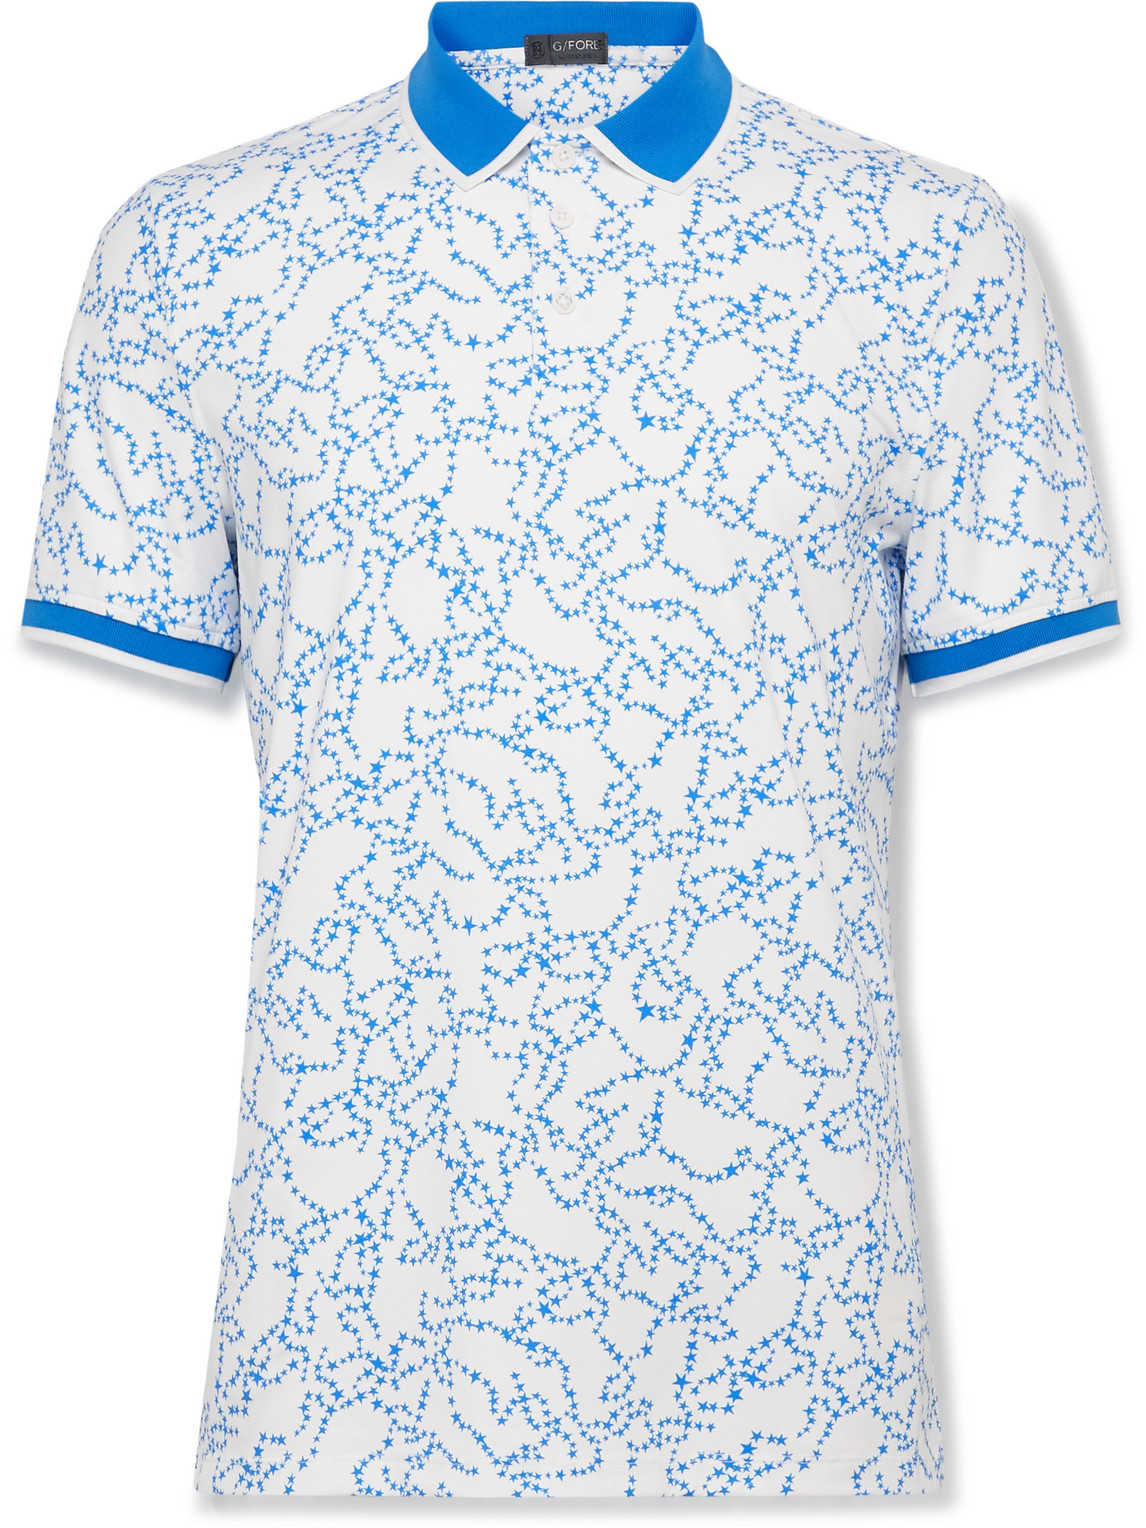 G/FORE Star Dust Slim-Fit Printed Tech-Jersey Golf Polo Shirt